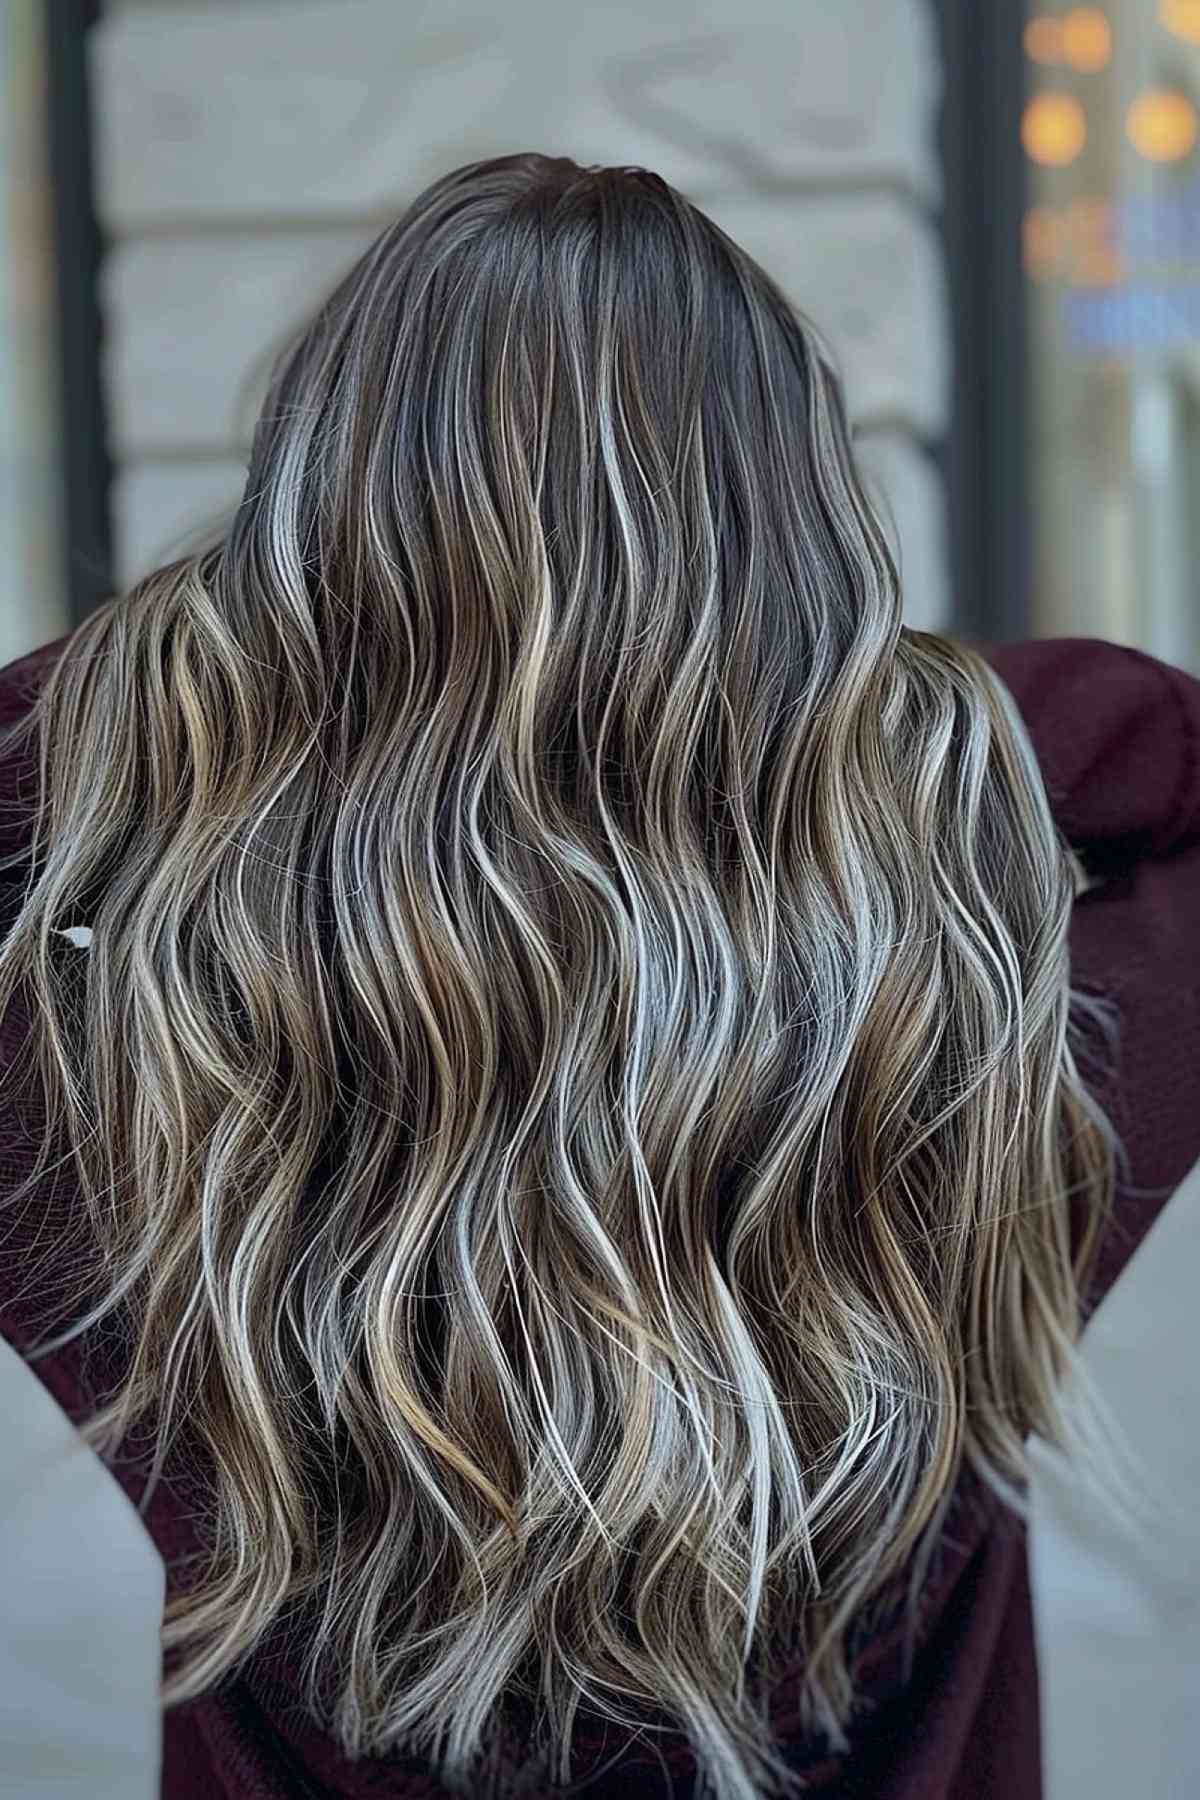 Long Thick Hair with Ash and Platinum Blonde Highlights